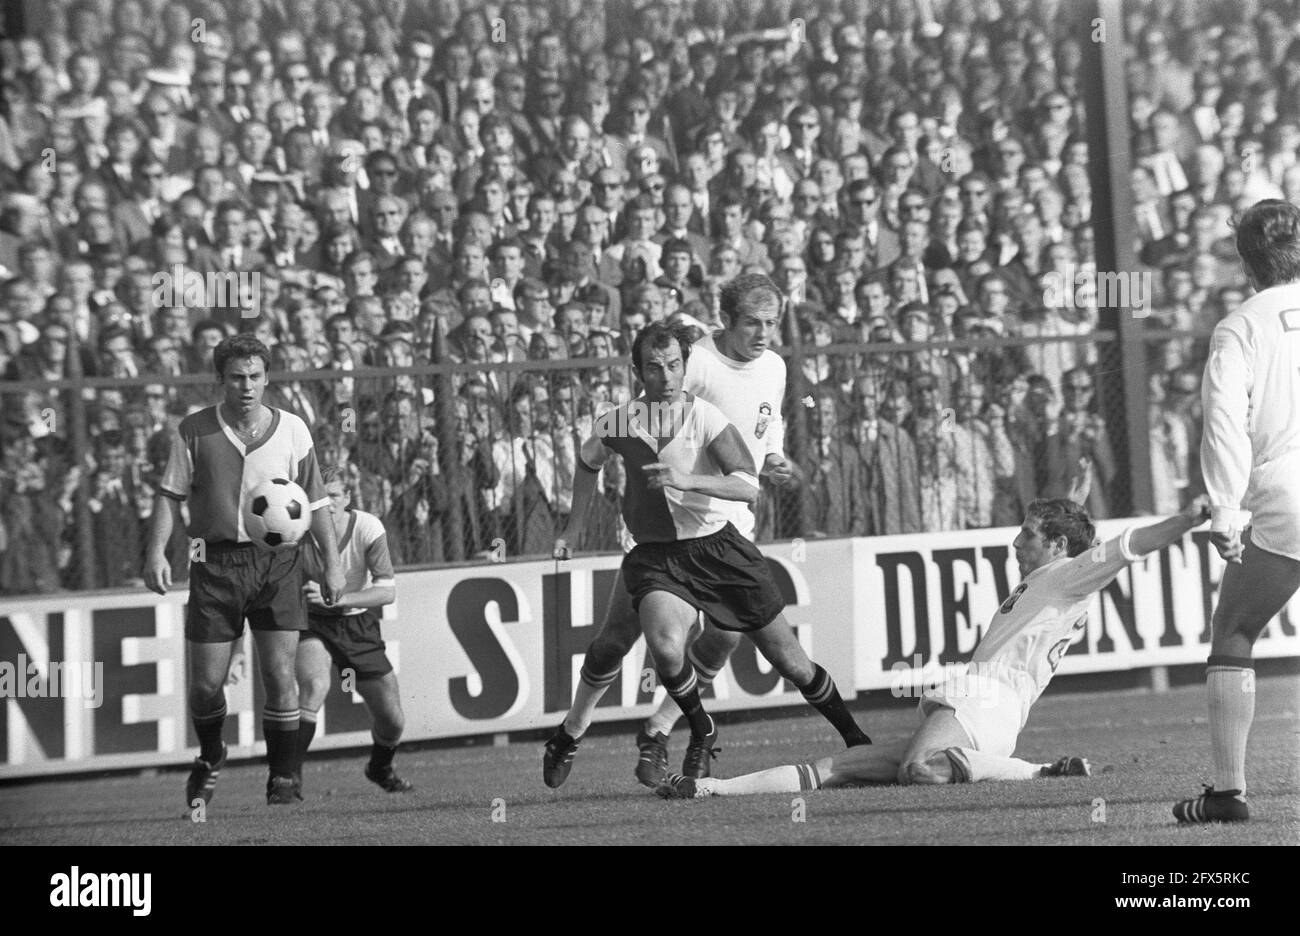 Go Ahead against Feyenoord 0-1. Coen Moulijn in action, October 5, 1969, soccer, The Netherlands, 20th century press agency photo, news to remember, documentary, historic photography 1945-1990, visual stories, human history of the Twentieth Century, capturing moments in time Stock Photo